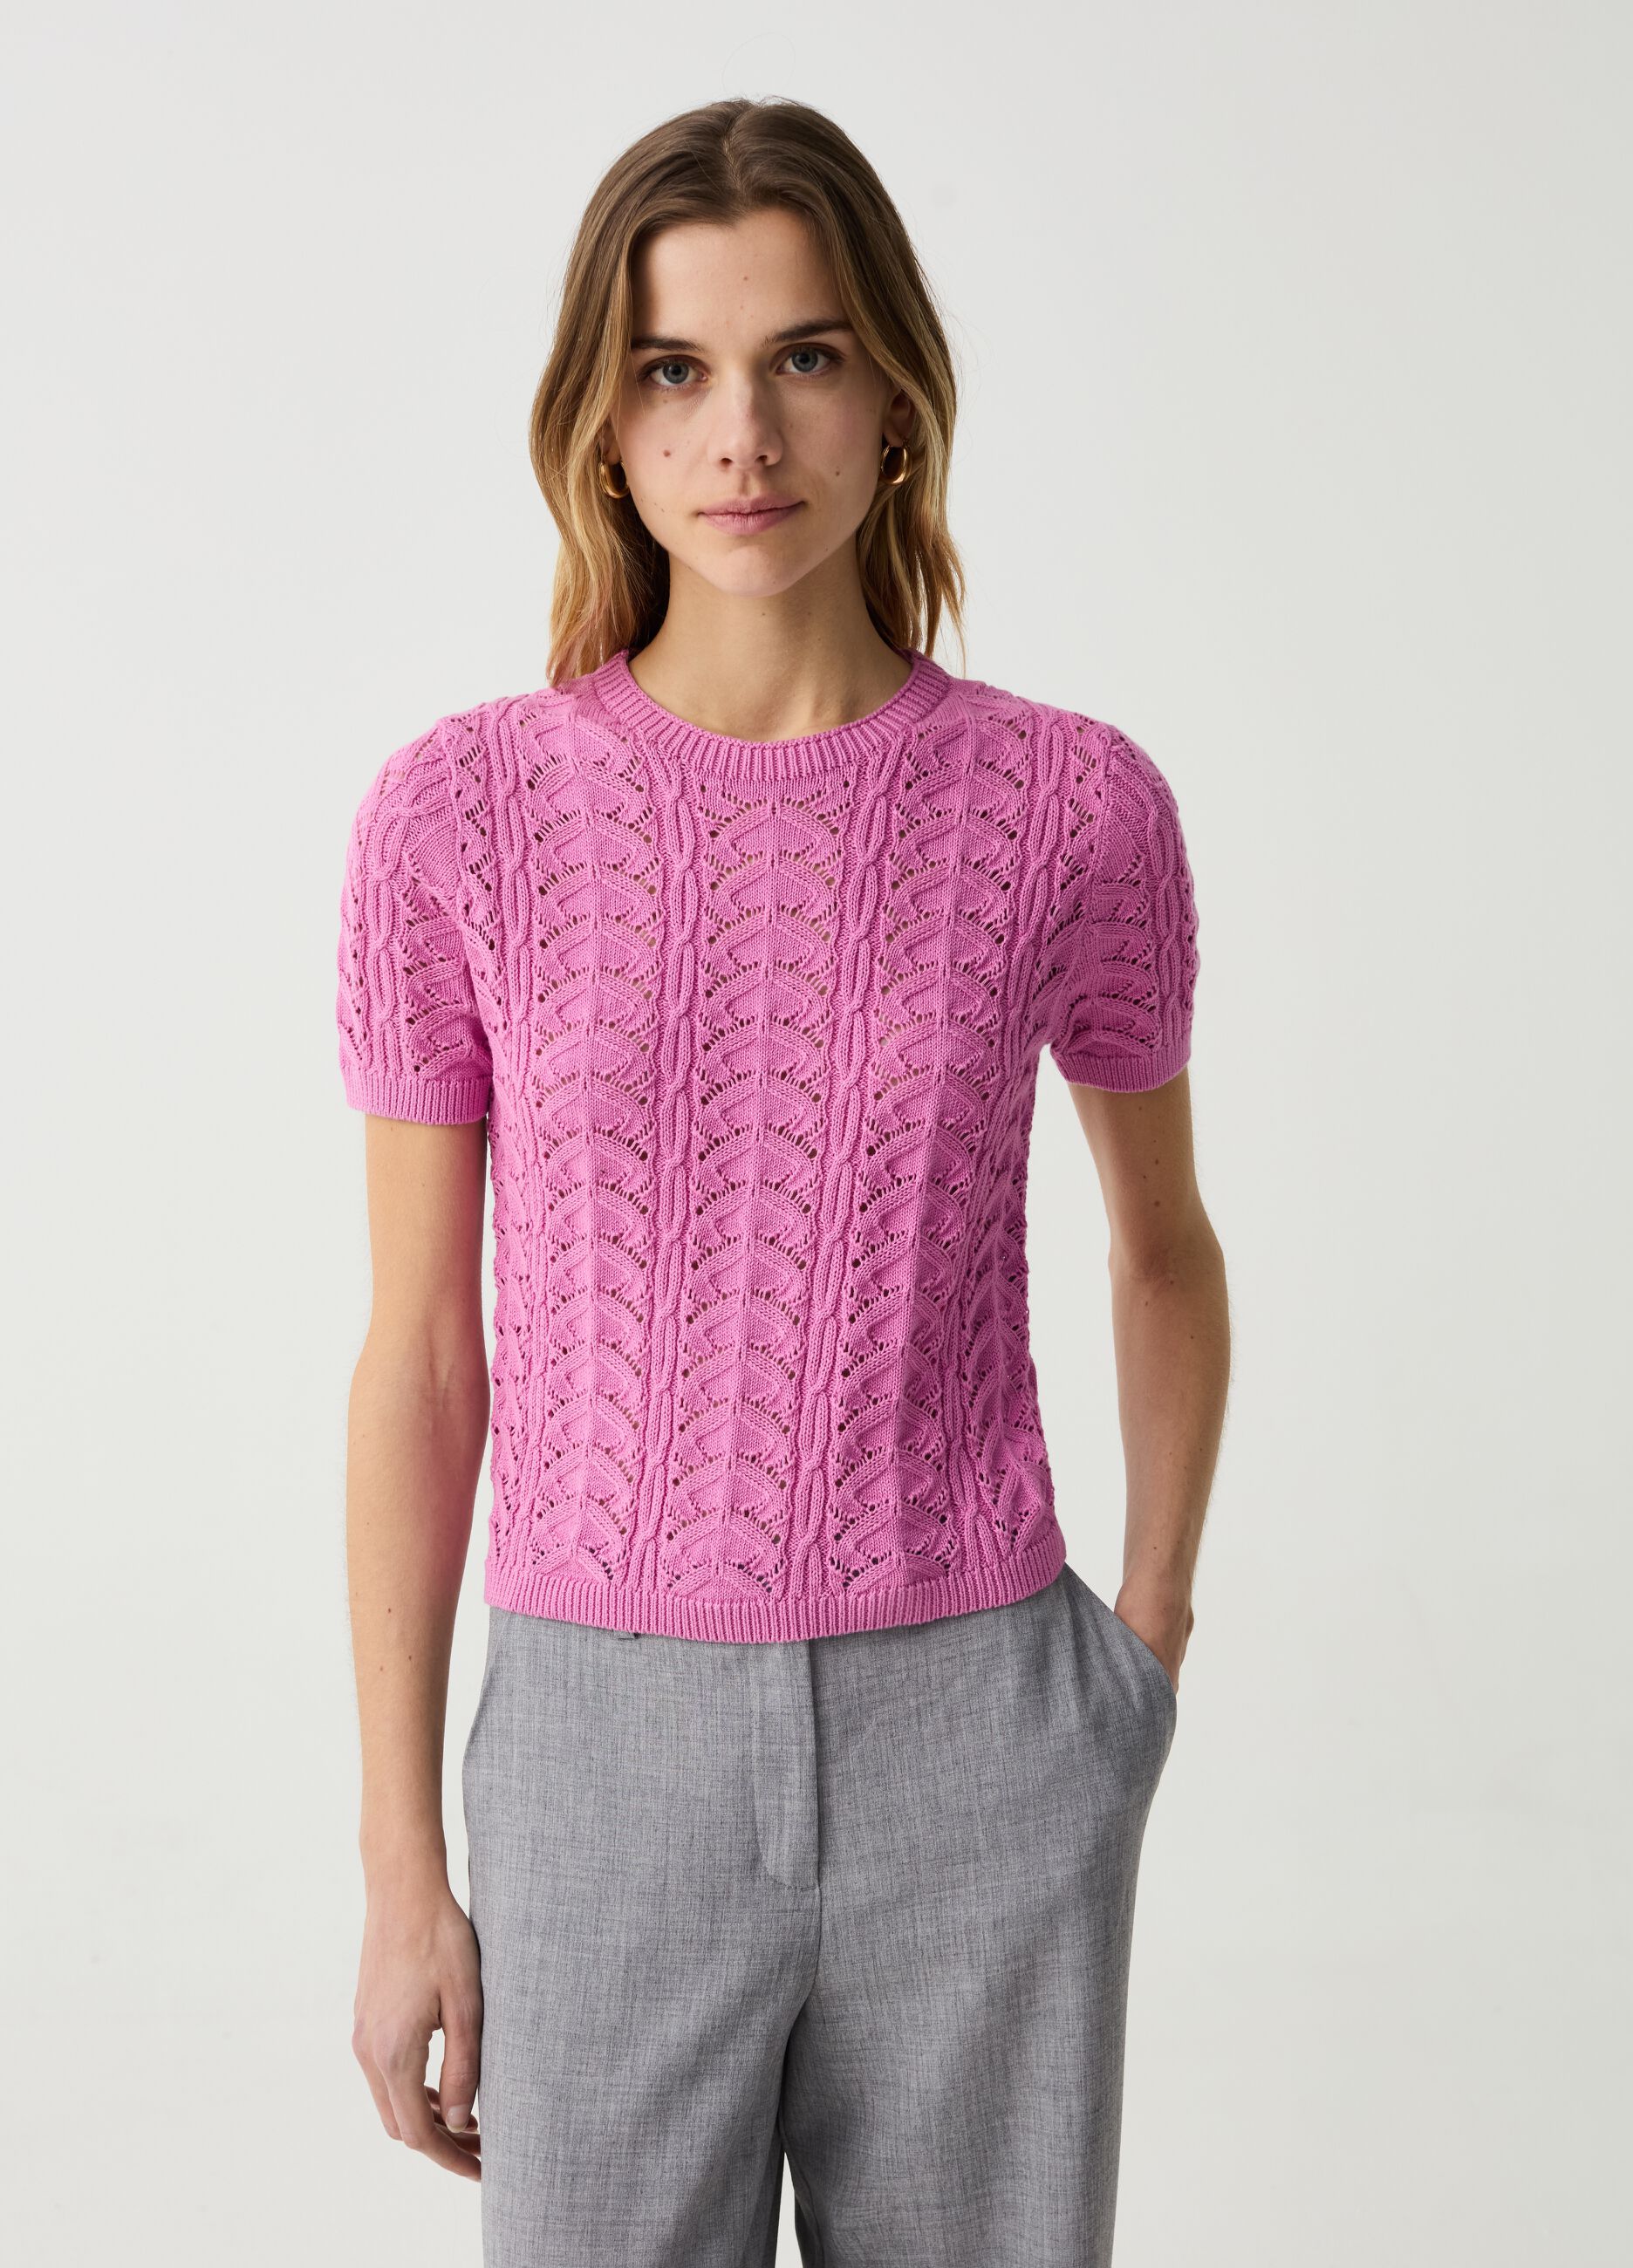 Crochet top with short sleeves